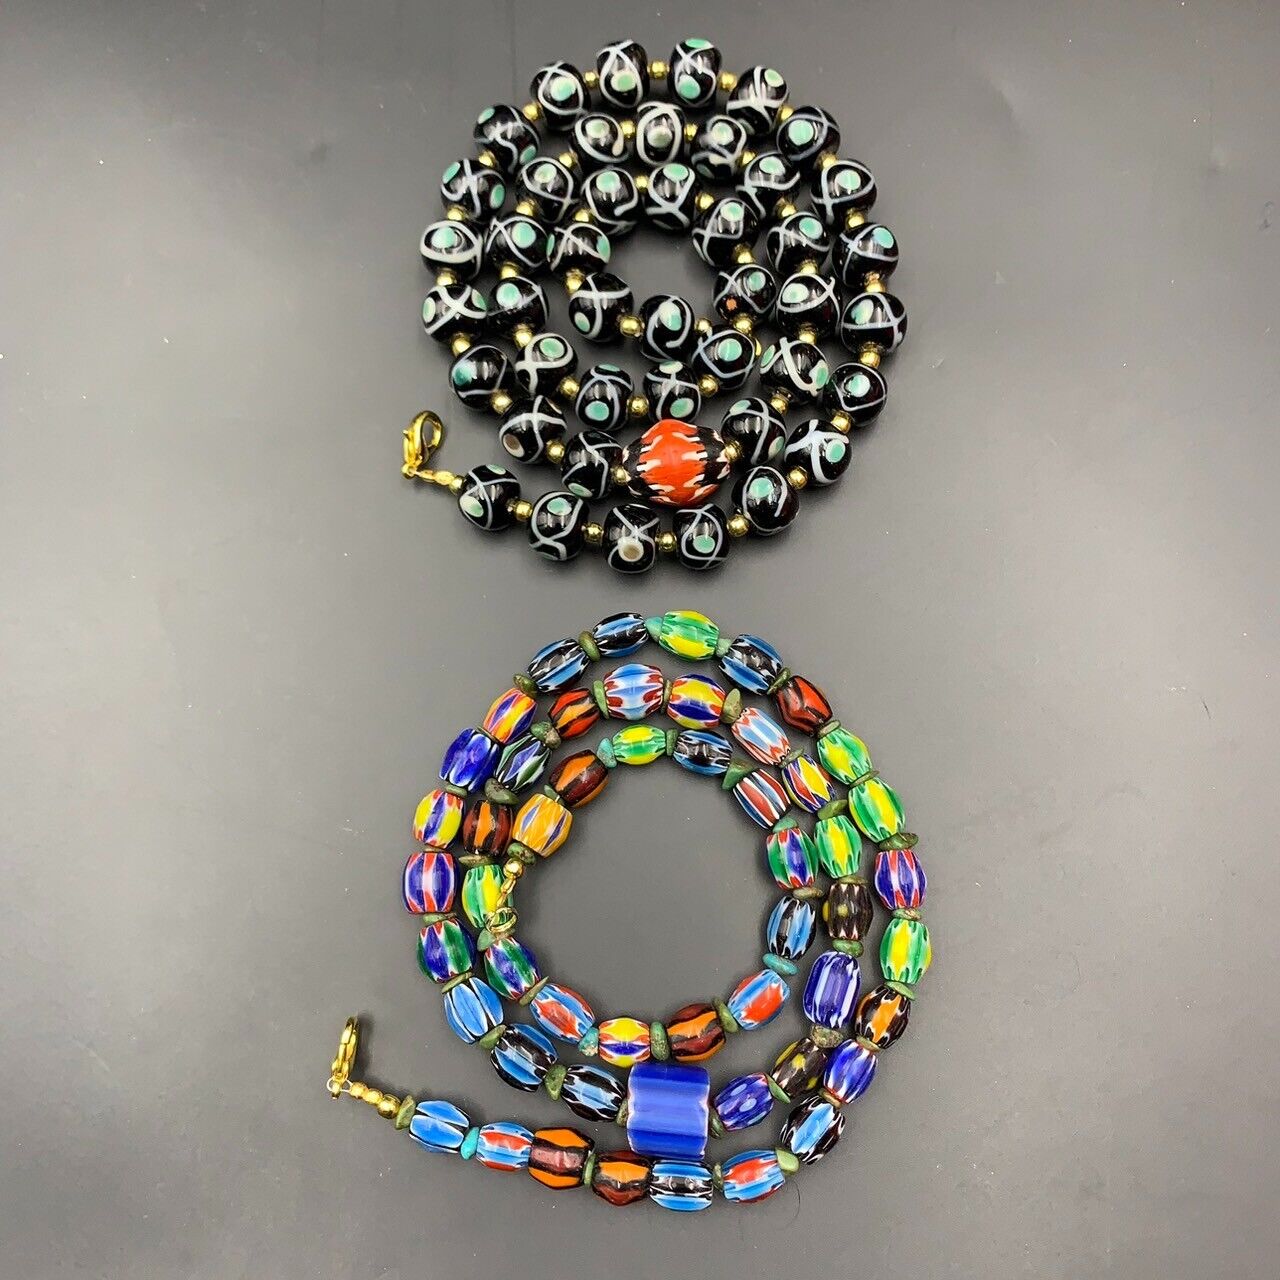 Vintage Chevron Trade Glass Beads & Fancy Glass Beads Necklace, 2 Piece - Image 4 of 6